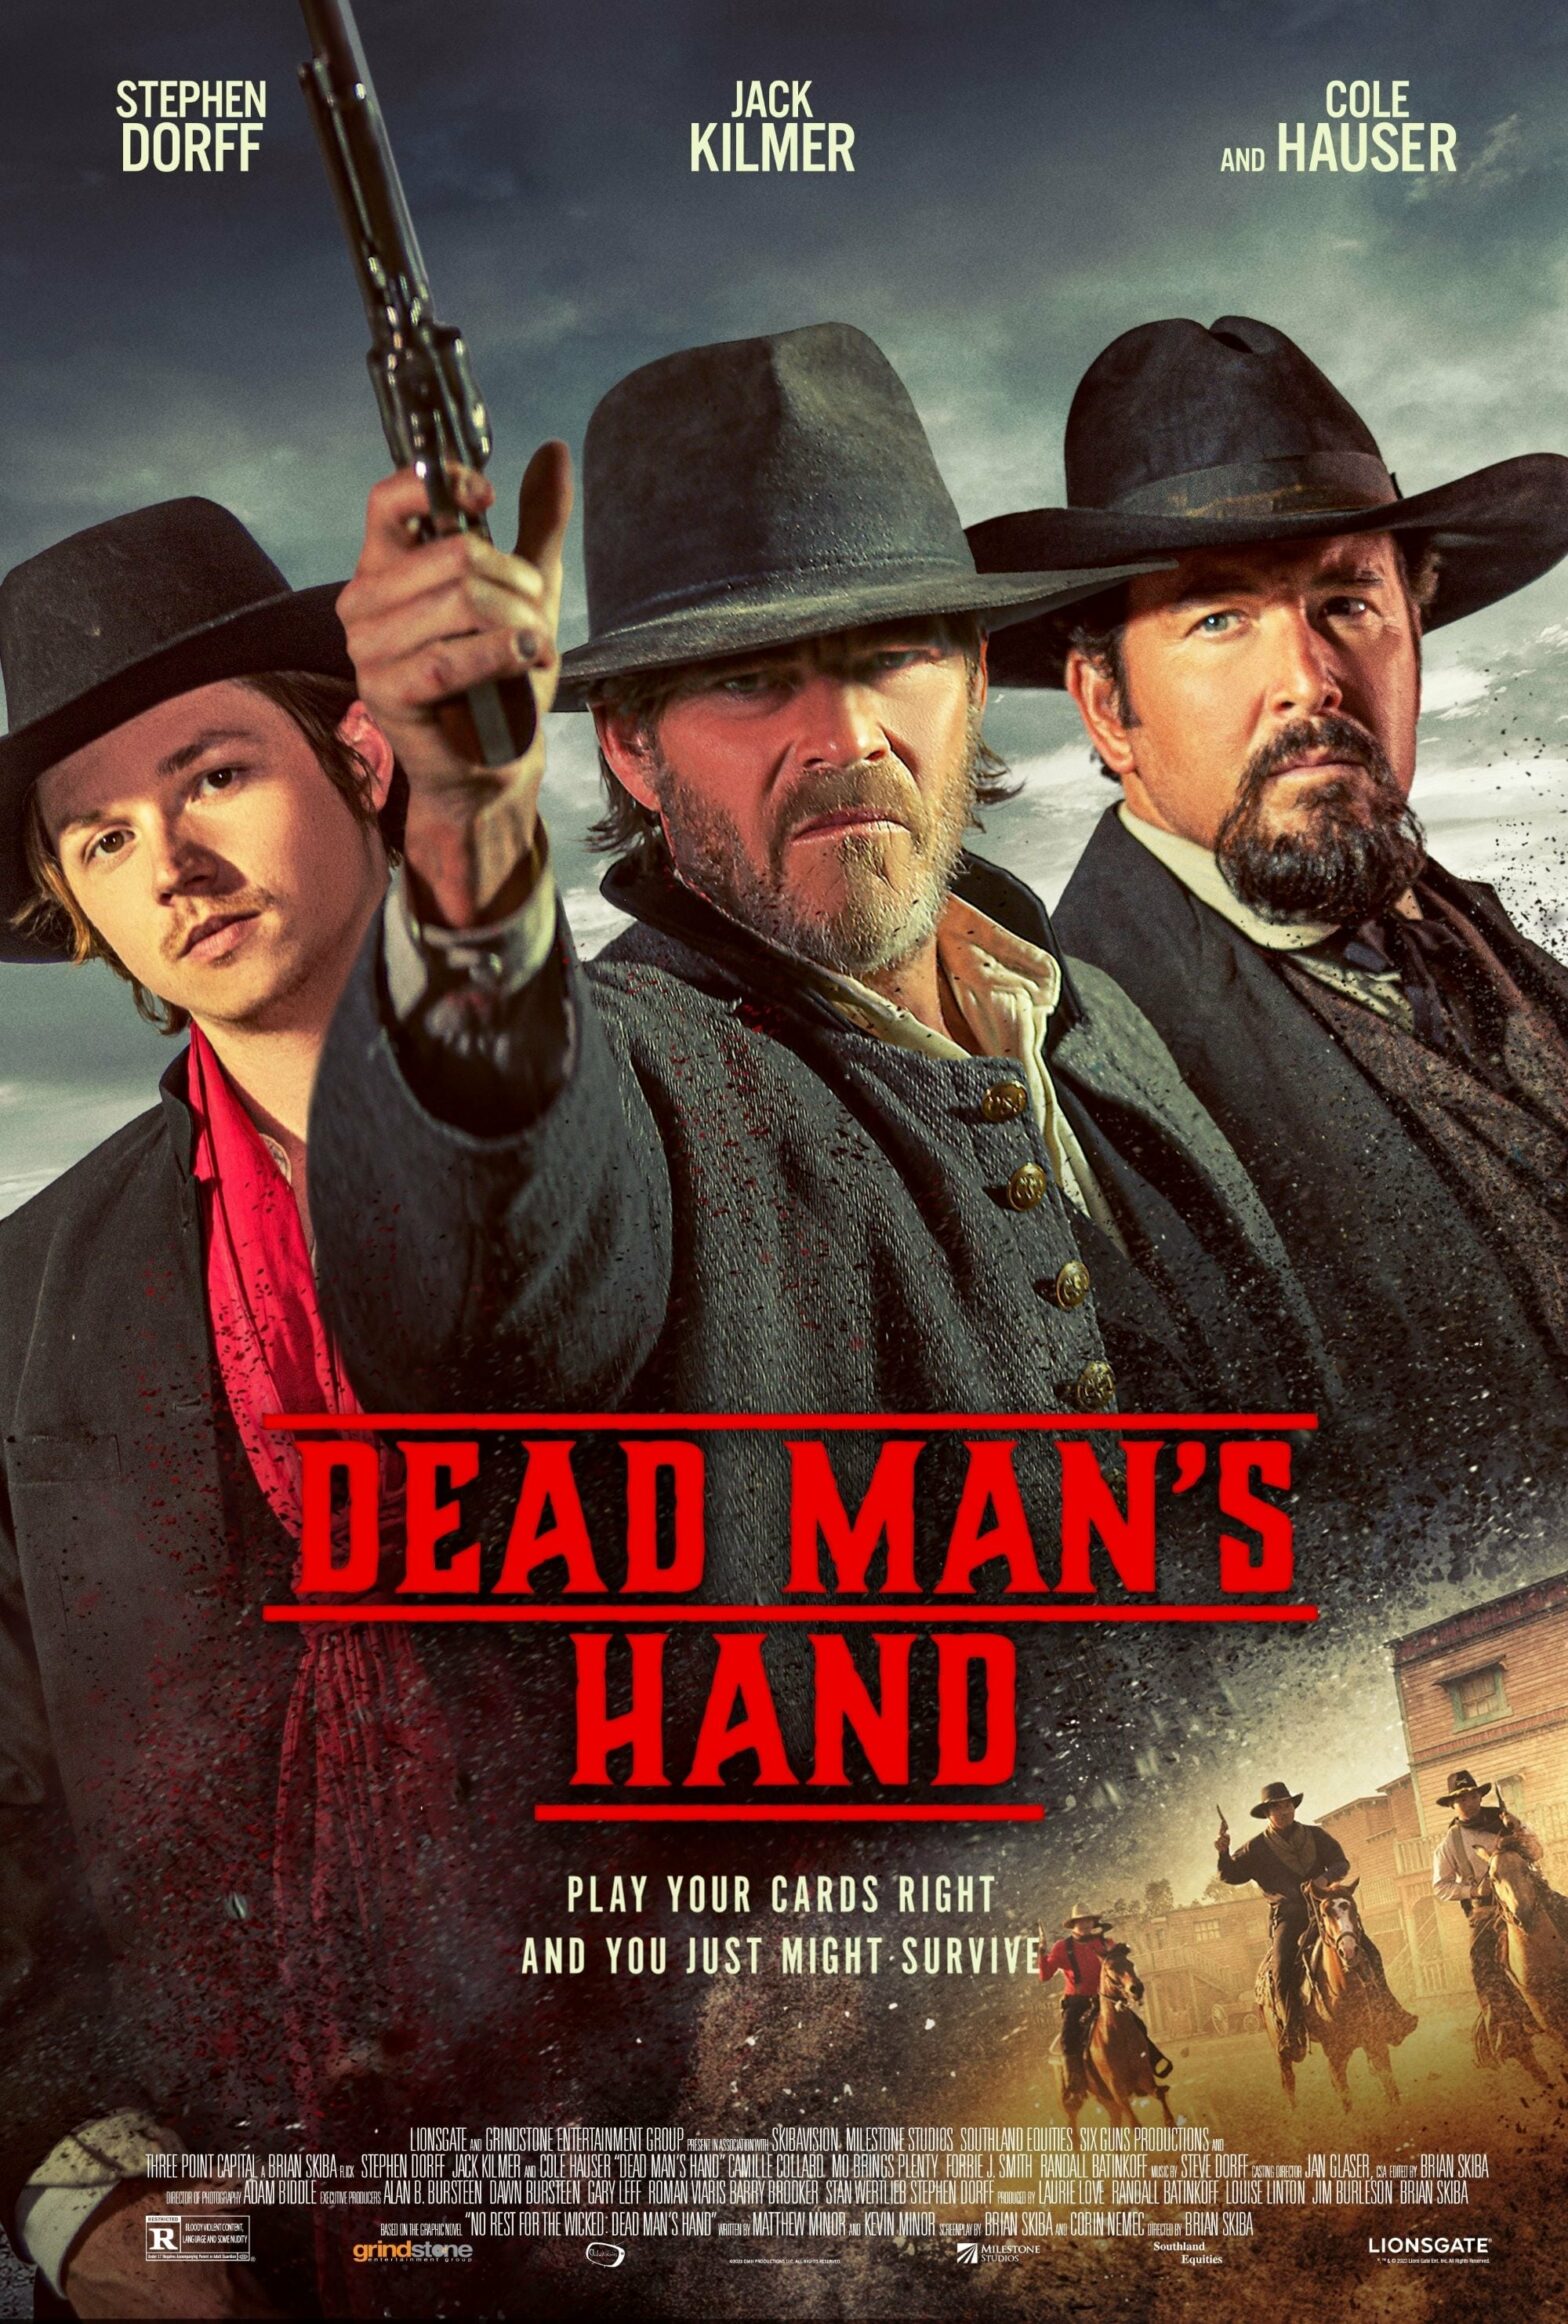 Poster for the movie "Dead Man's Hand"